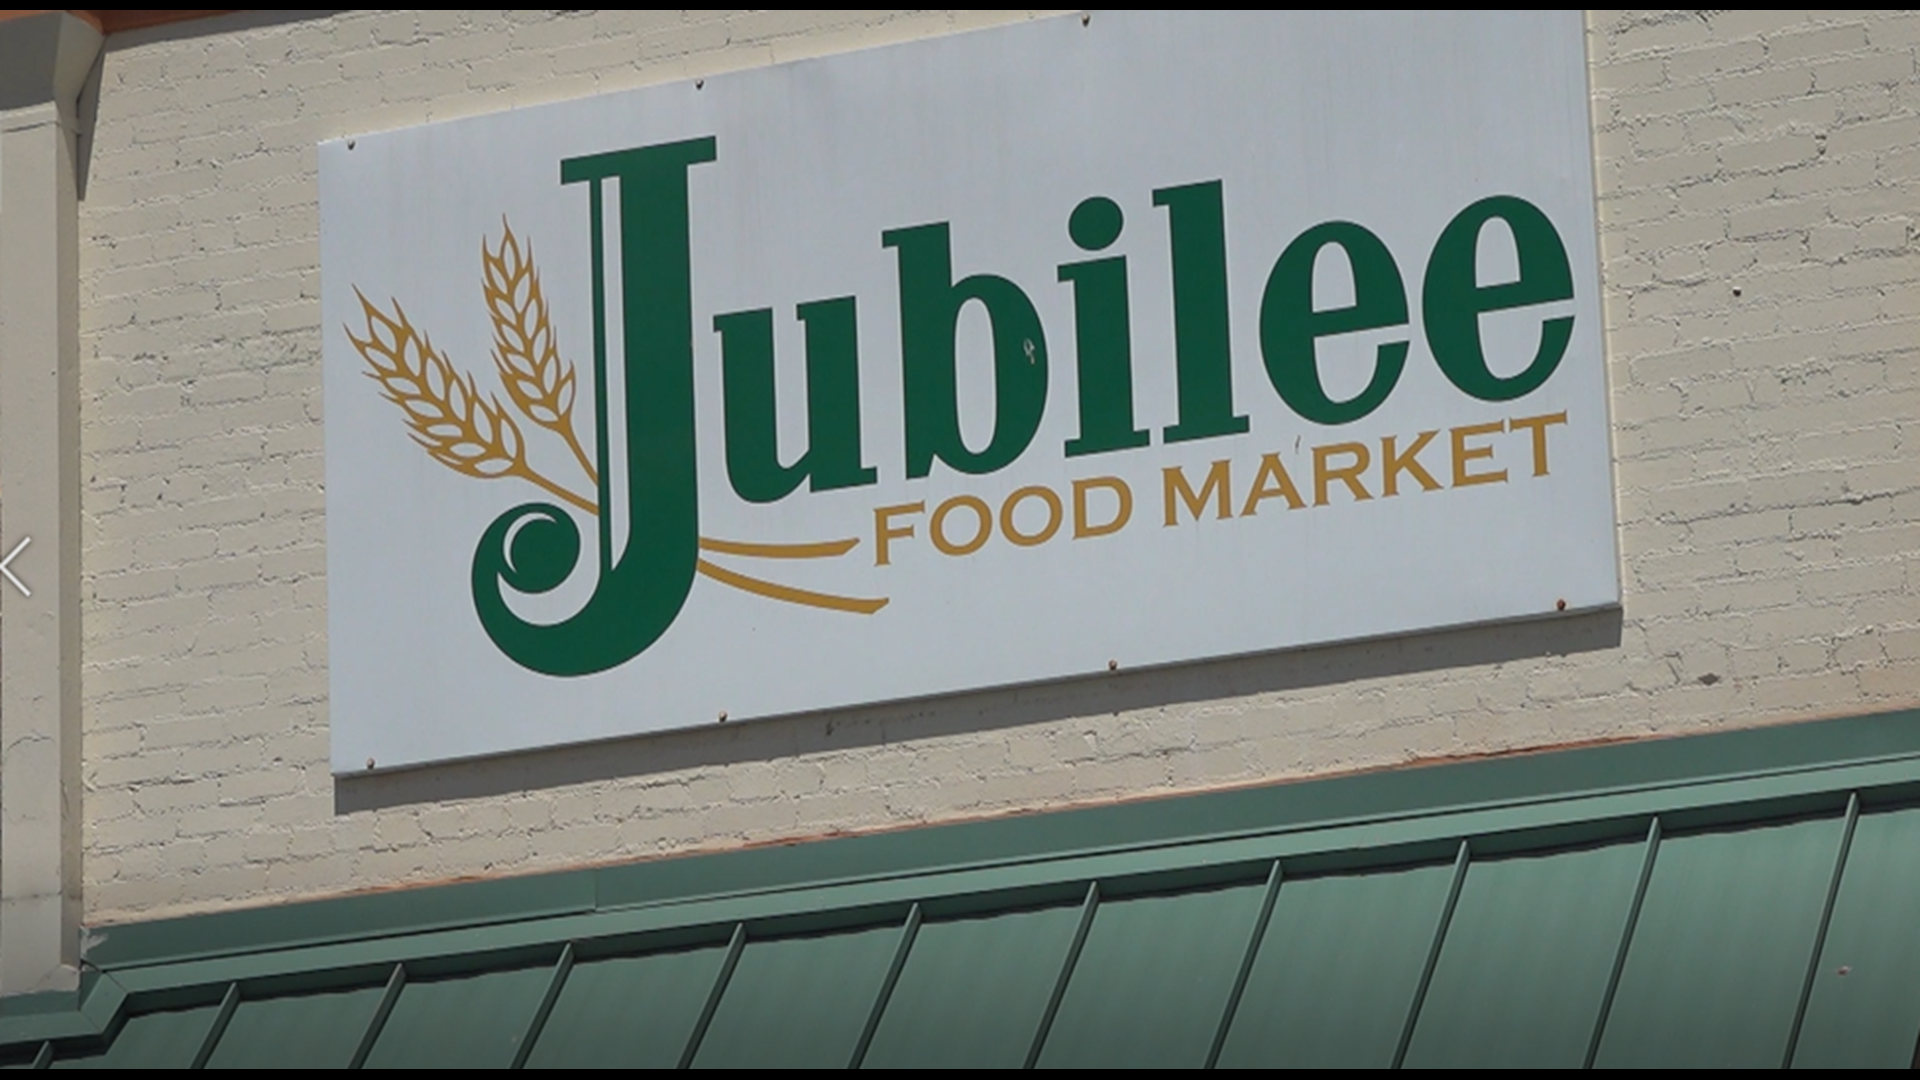 To keep the nonprofit store thriving, the founder is encouraging 100 middle-class people to open their wallets and shop at Jubilee once a month.